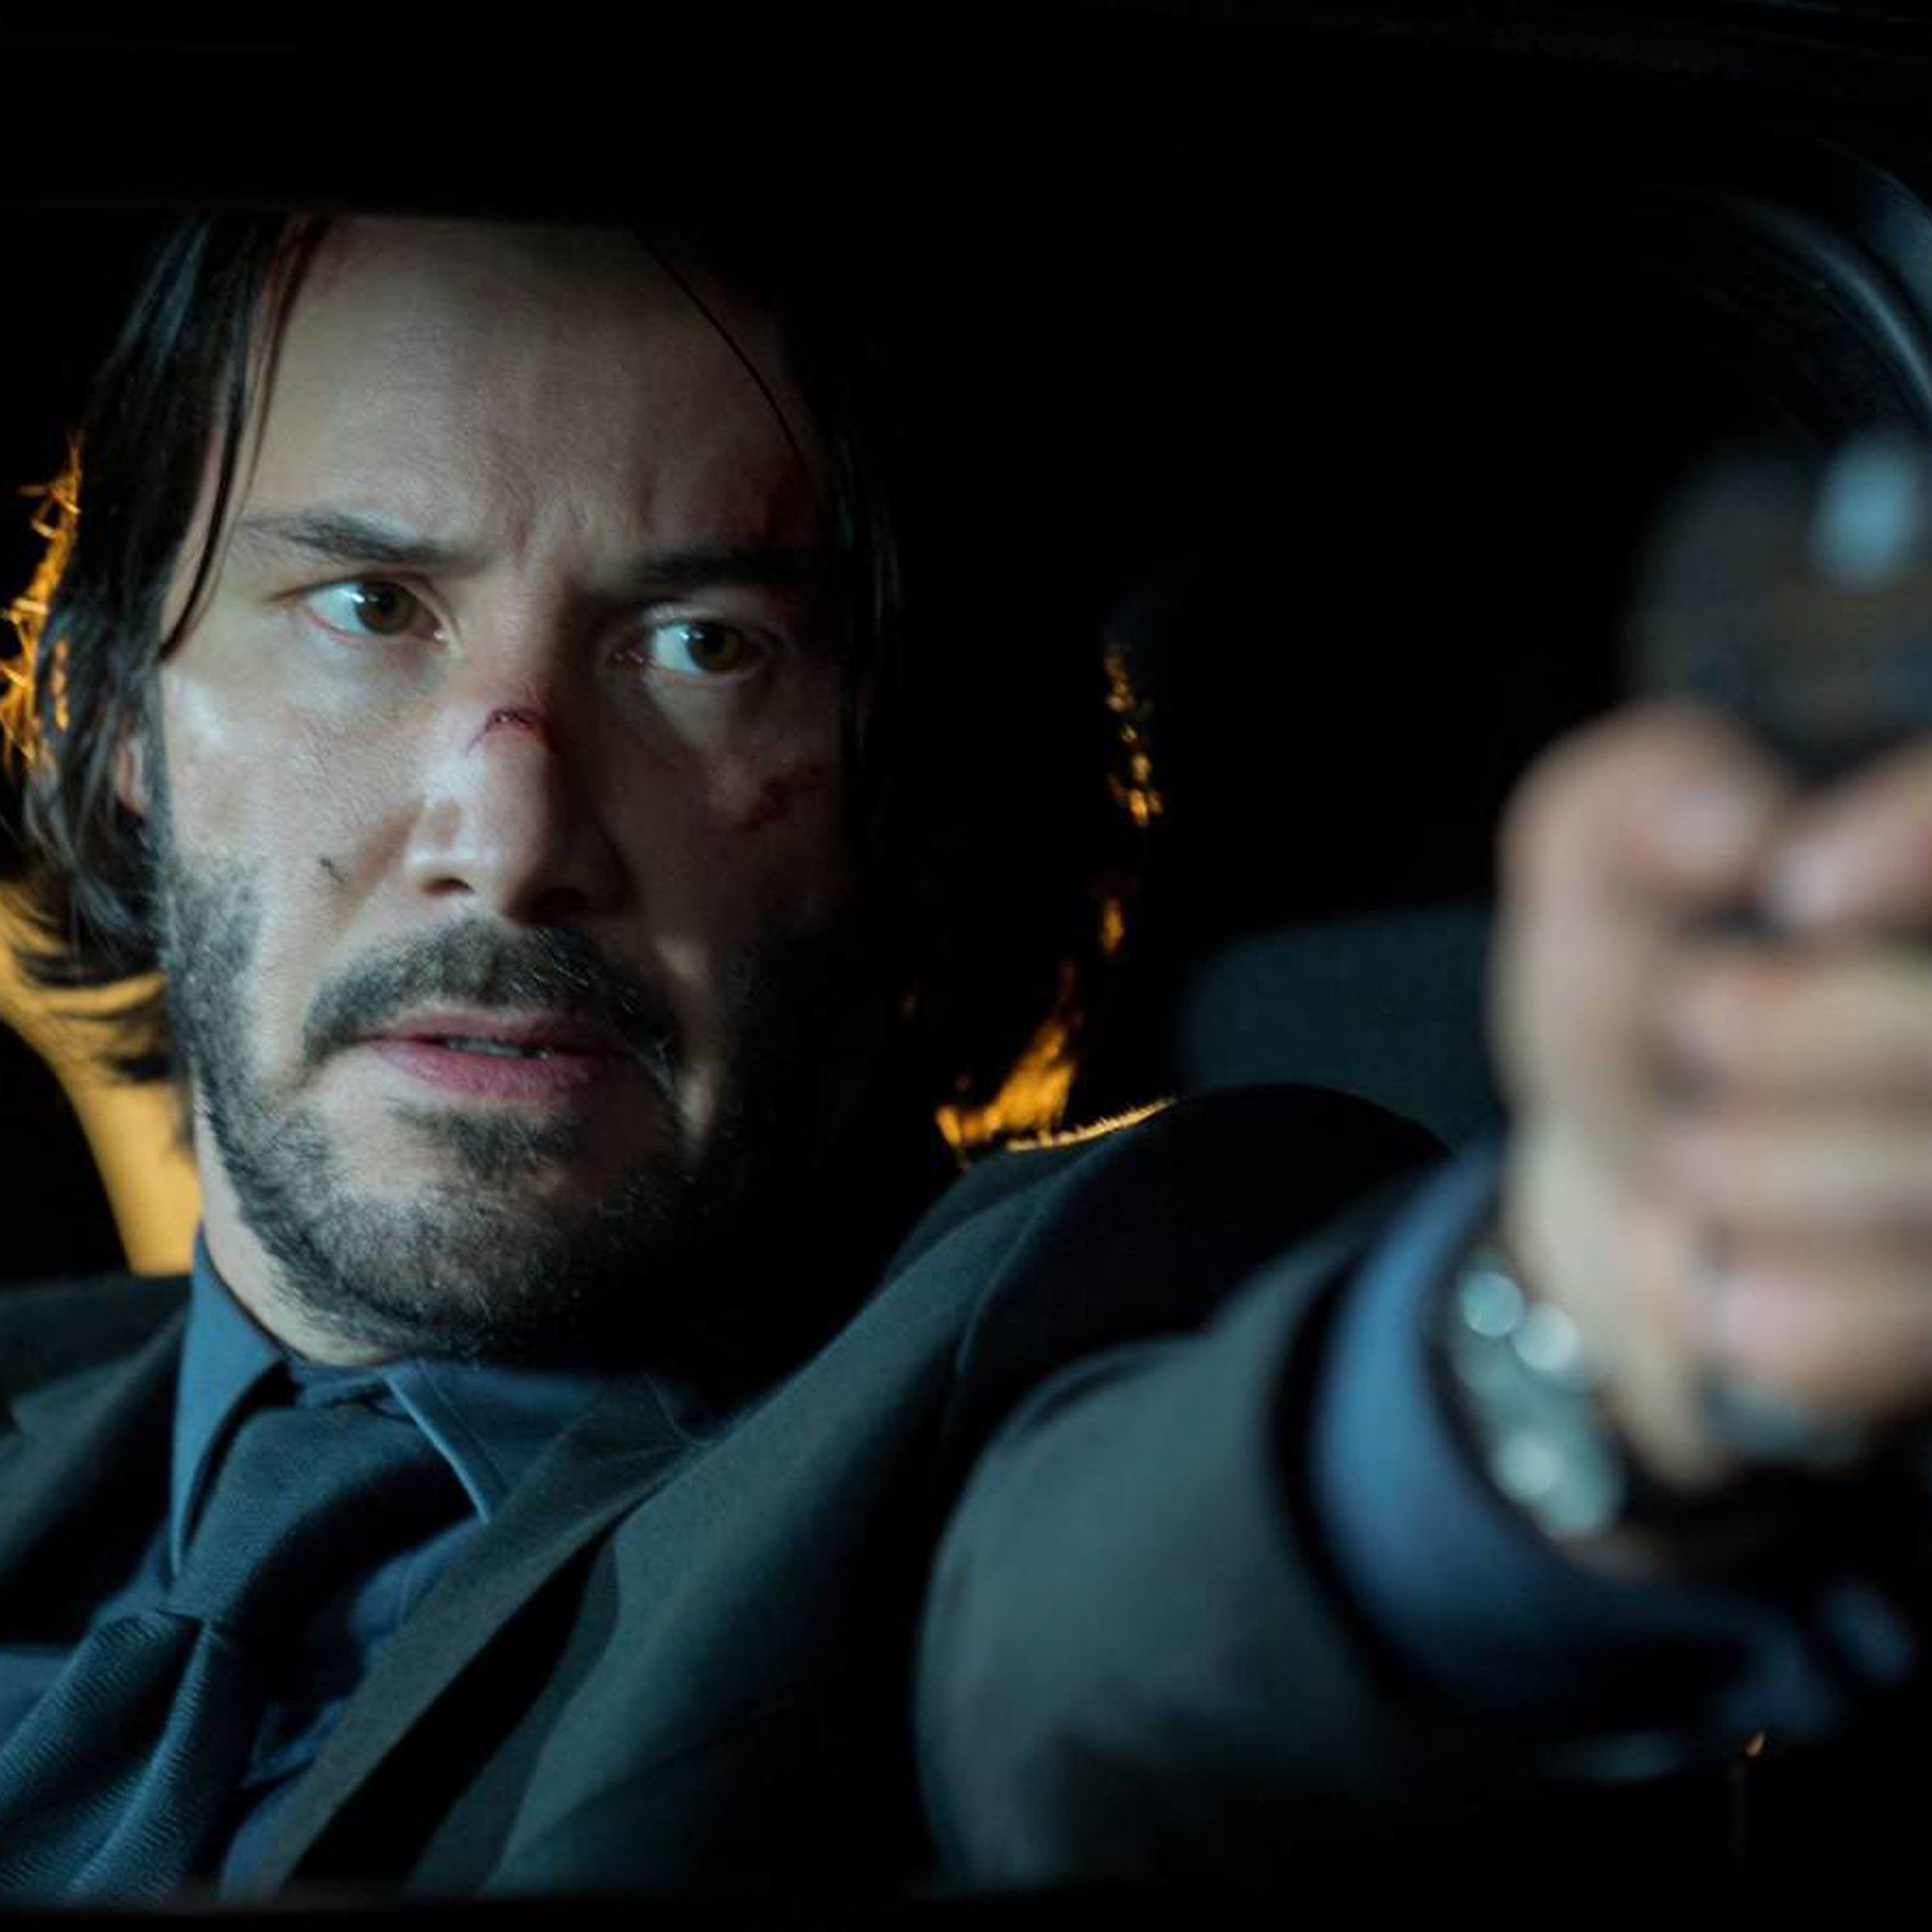 A man in a suit sitting in a car and pointing a gun out the window.